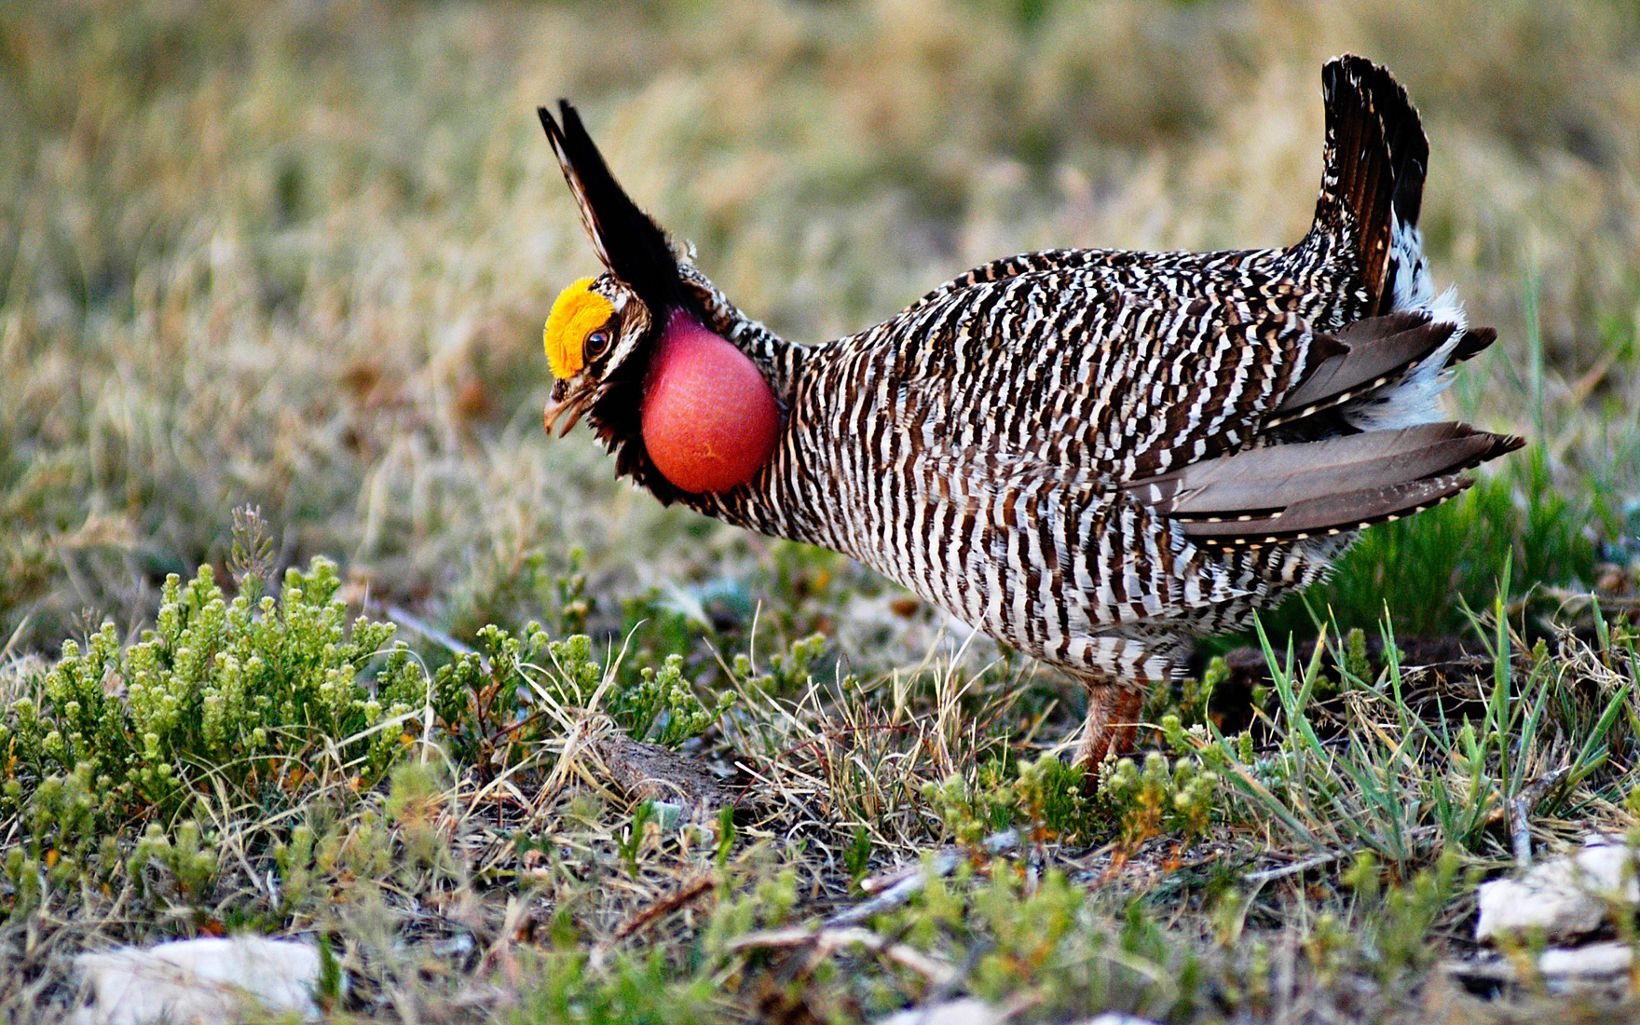 A lesser prairie chicken at The Nature Conservancy's Milnesand Preserve in New Mexico stands on the ground and shows off its bright red cheek sacs.